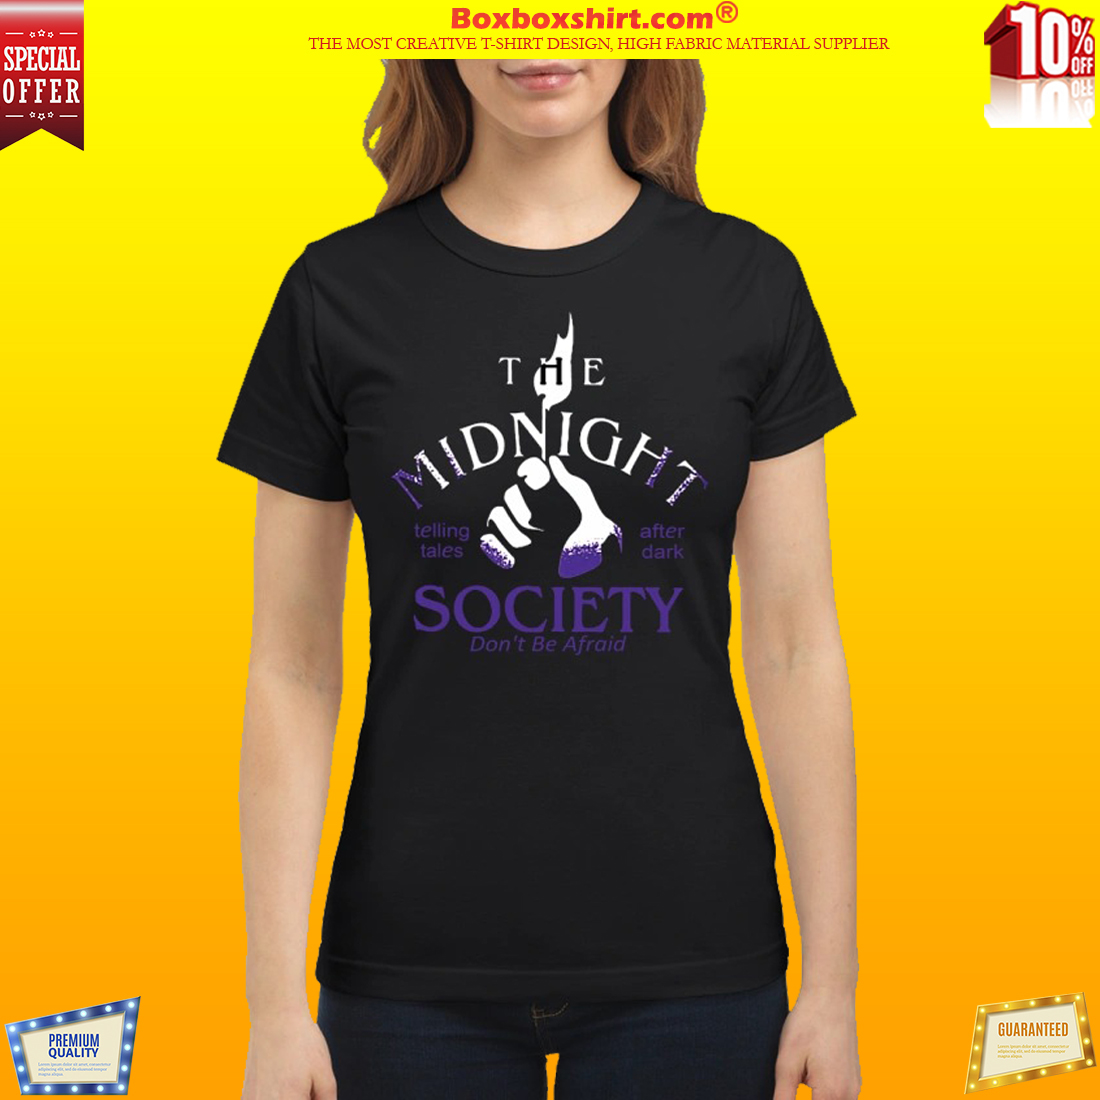 The midnight society don't be afraid after dark classic shirt